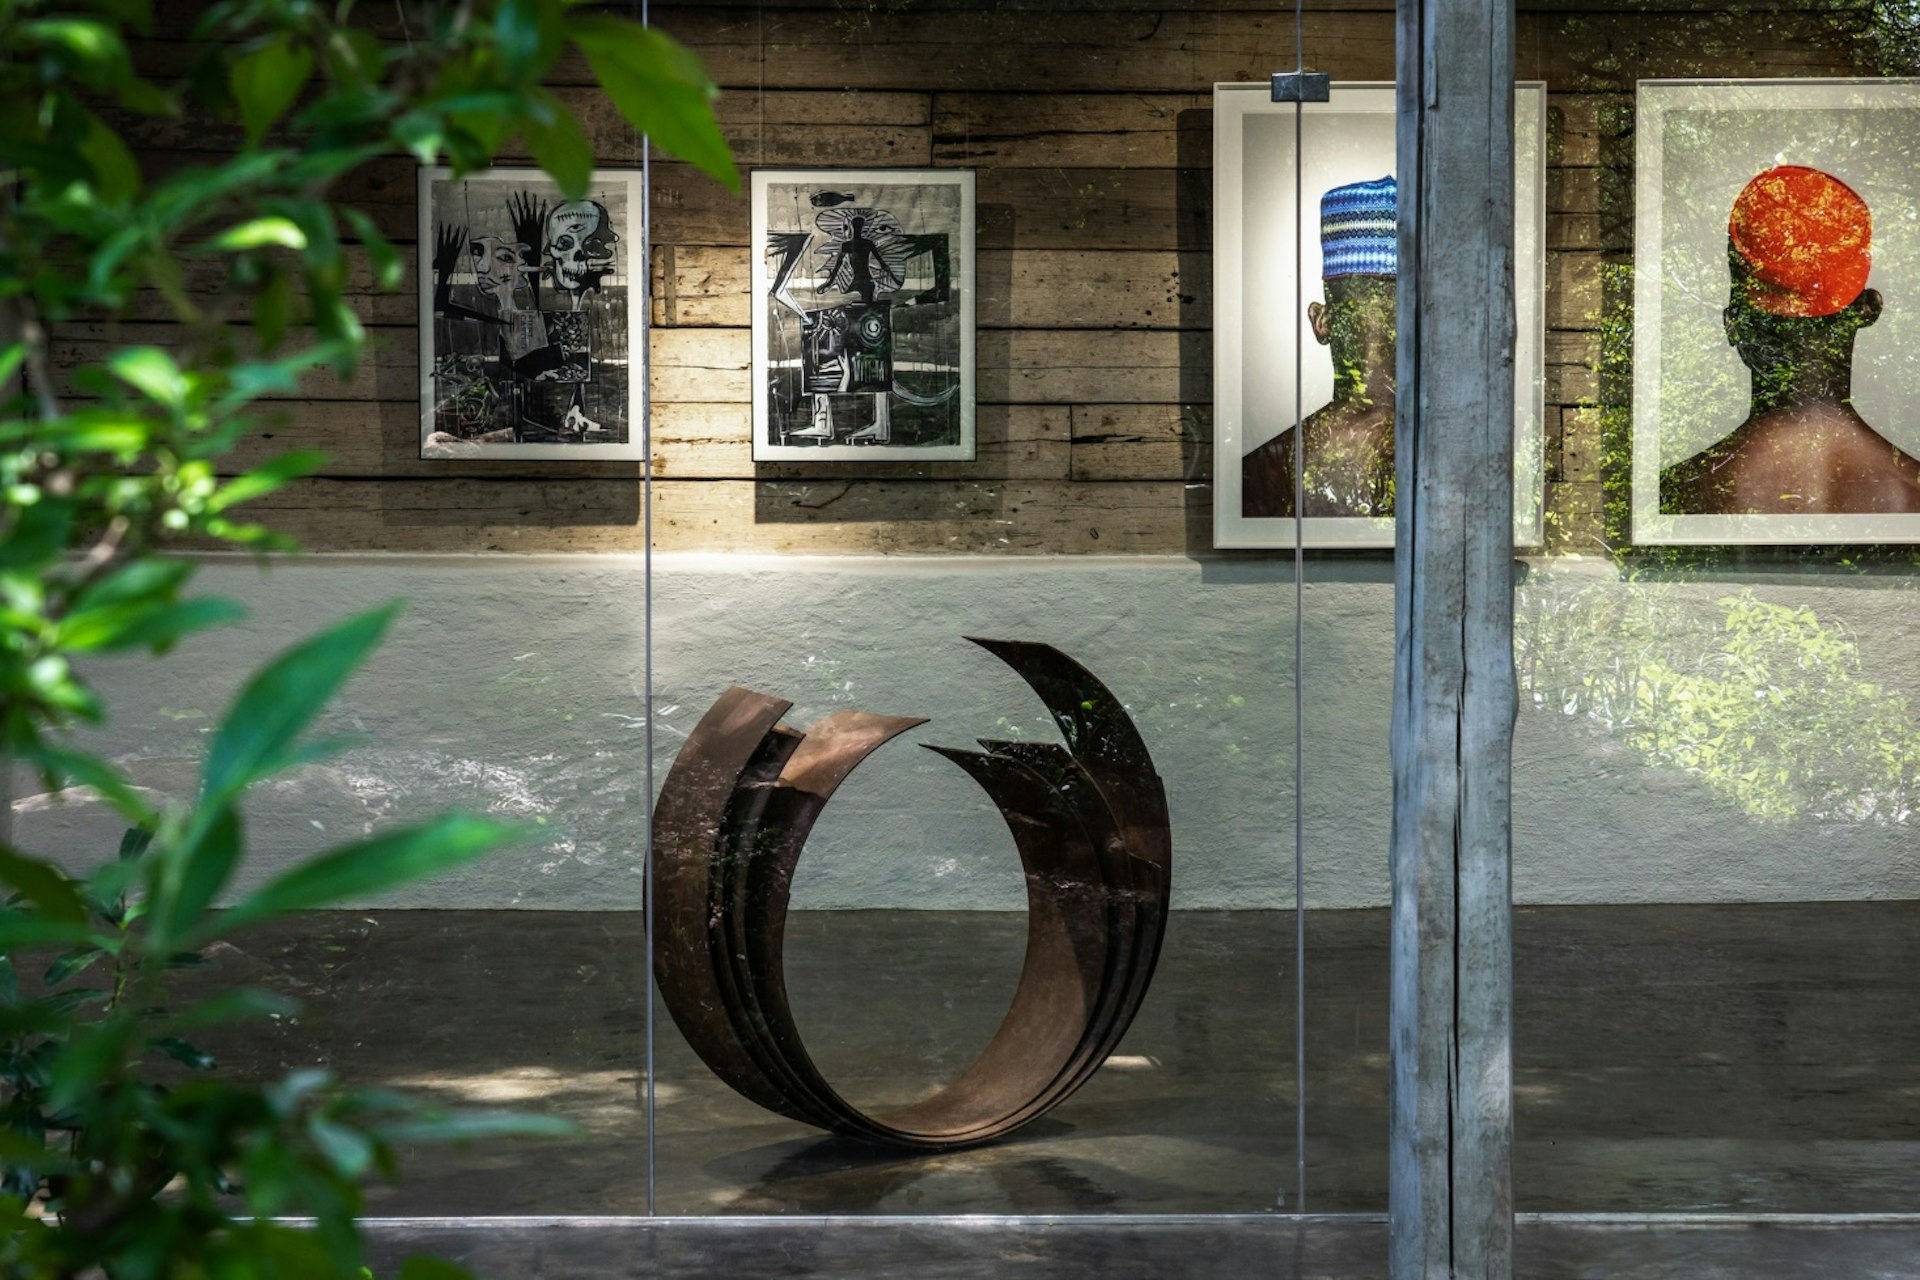 A round metal sculpture with art prints on the wall in Singita Art Gallery